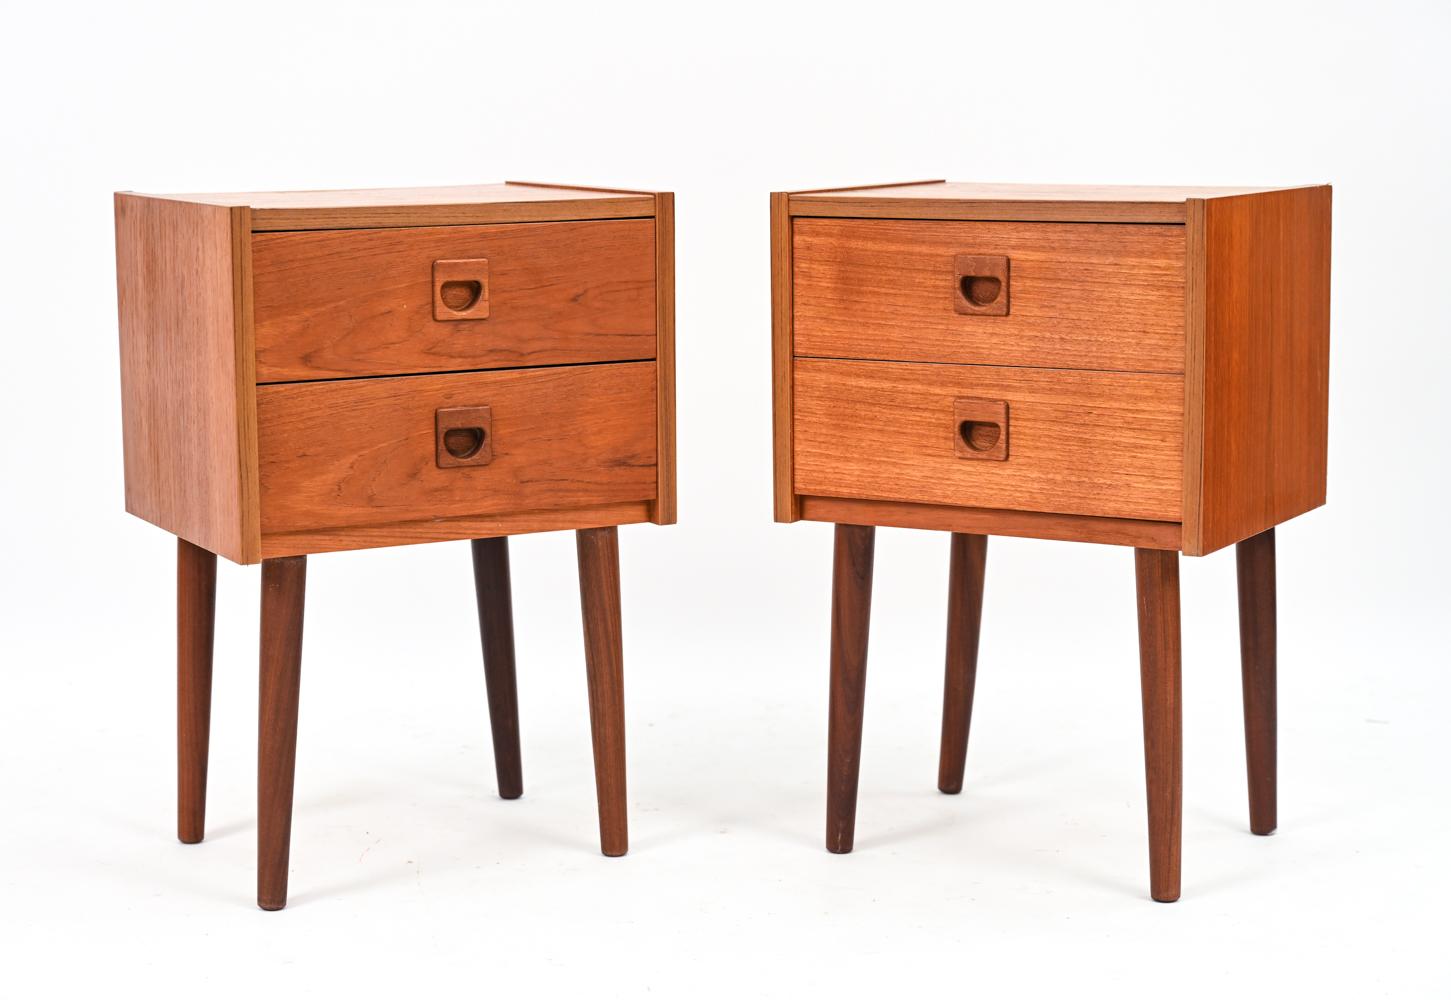 A fabulous pair of Danish mid-century nightstands or bedside petite chests in teak veneer designed by Erik Brouer, c. 1960's. Imbued with Scandinavian modern aesthetic, these end tables feature sculptural recessed drawer pulls and well-proportioned